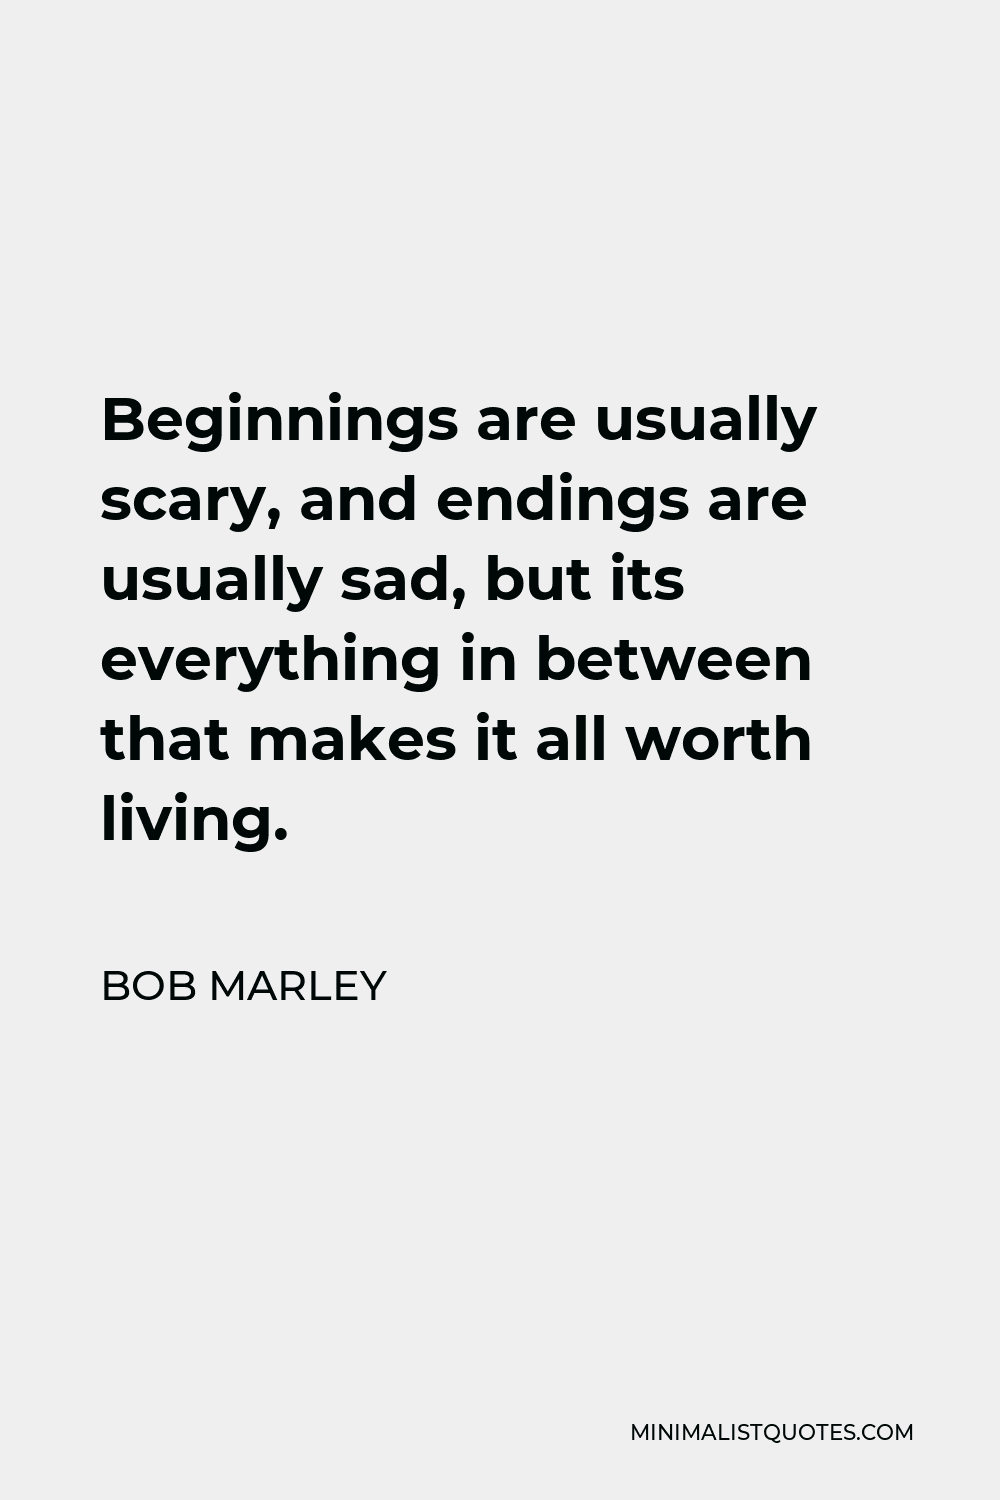 Bob Marley Quote - Beginnings are usually scary, and endings are usually sad, but its everything in between that makes it all worth living.